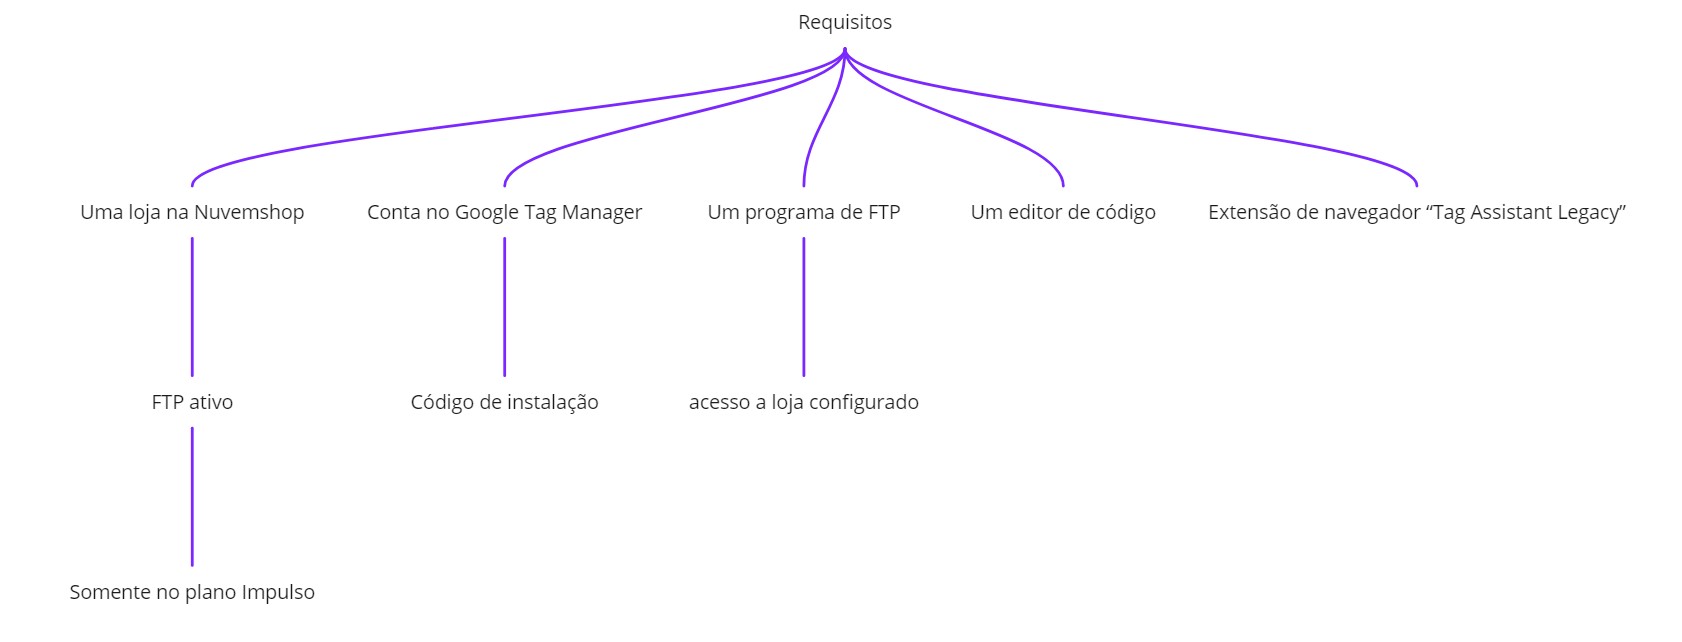 requisitos tag manager nuvemshop